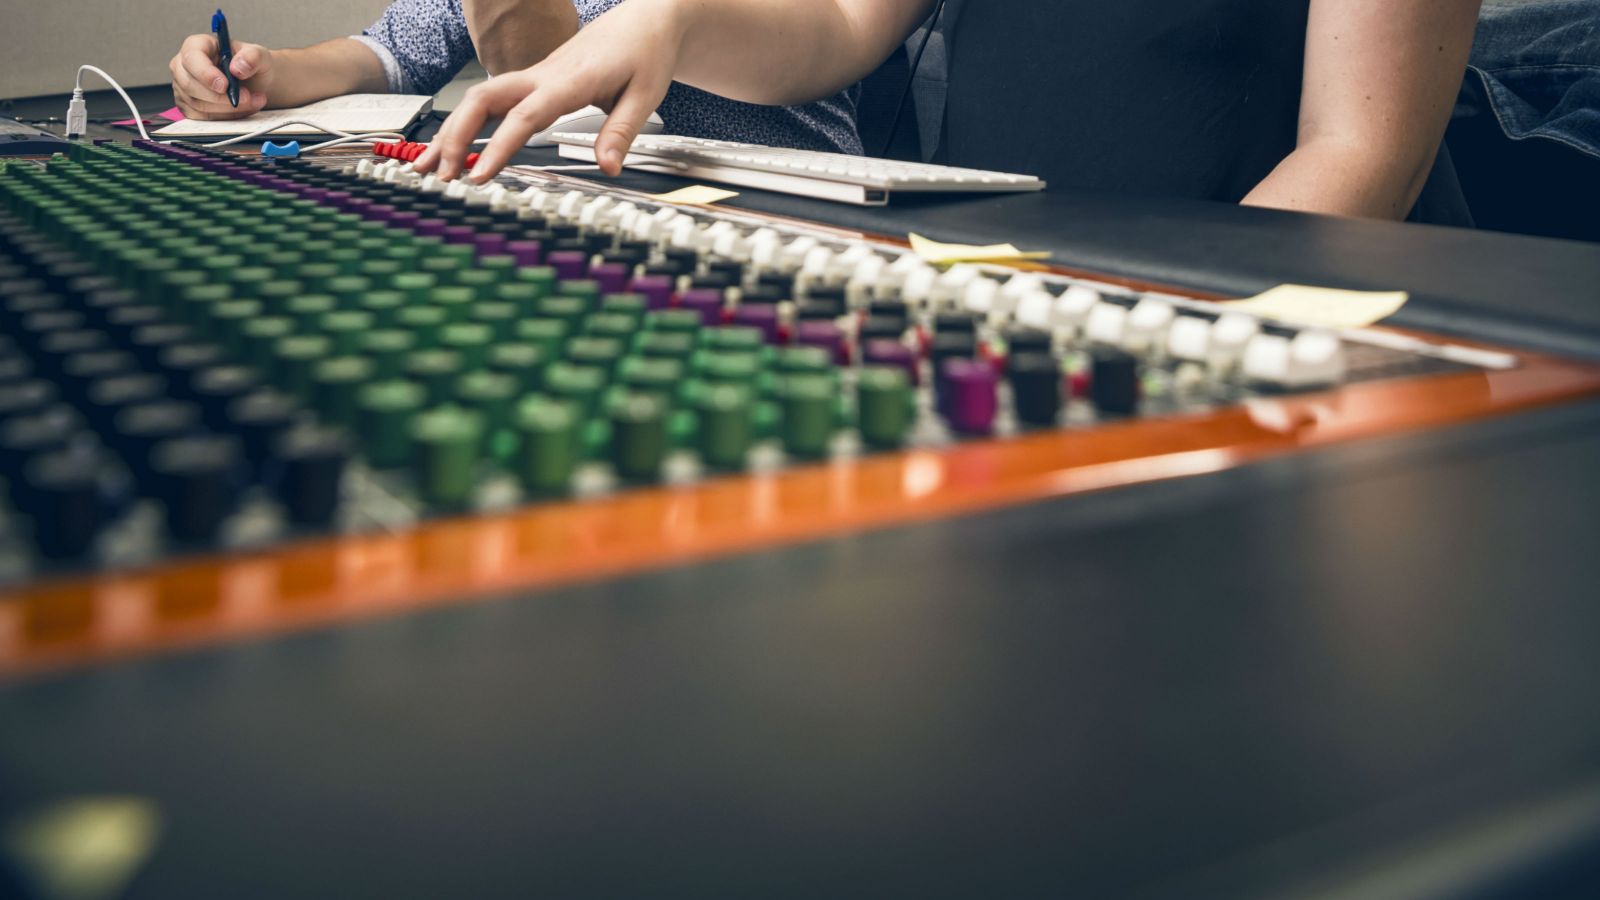 sound desk with fingers